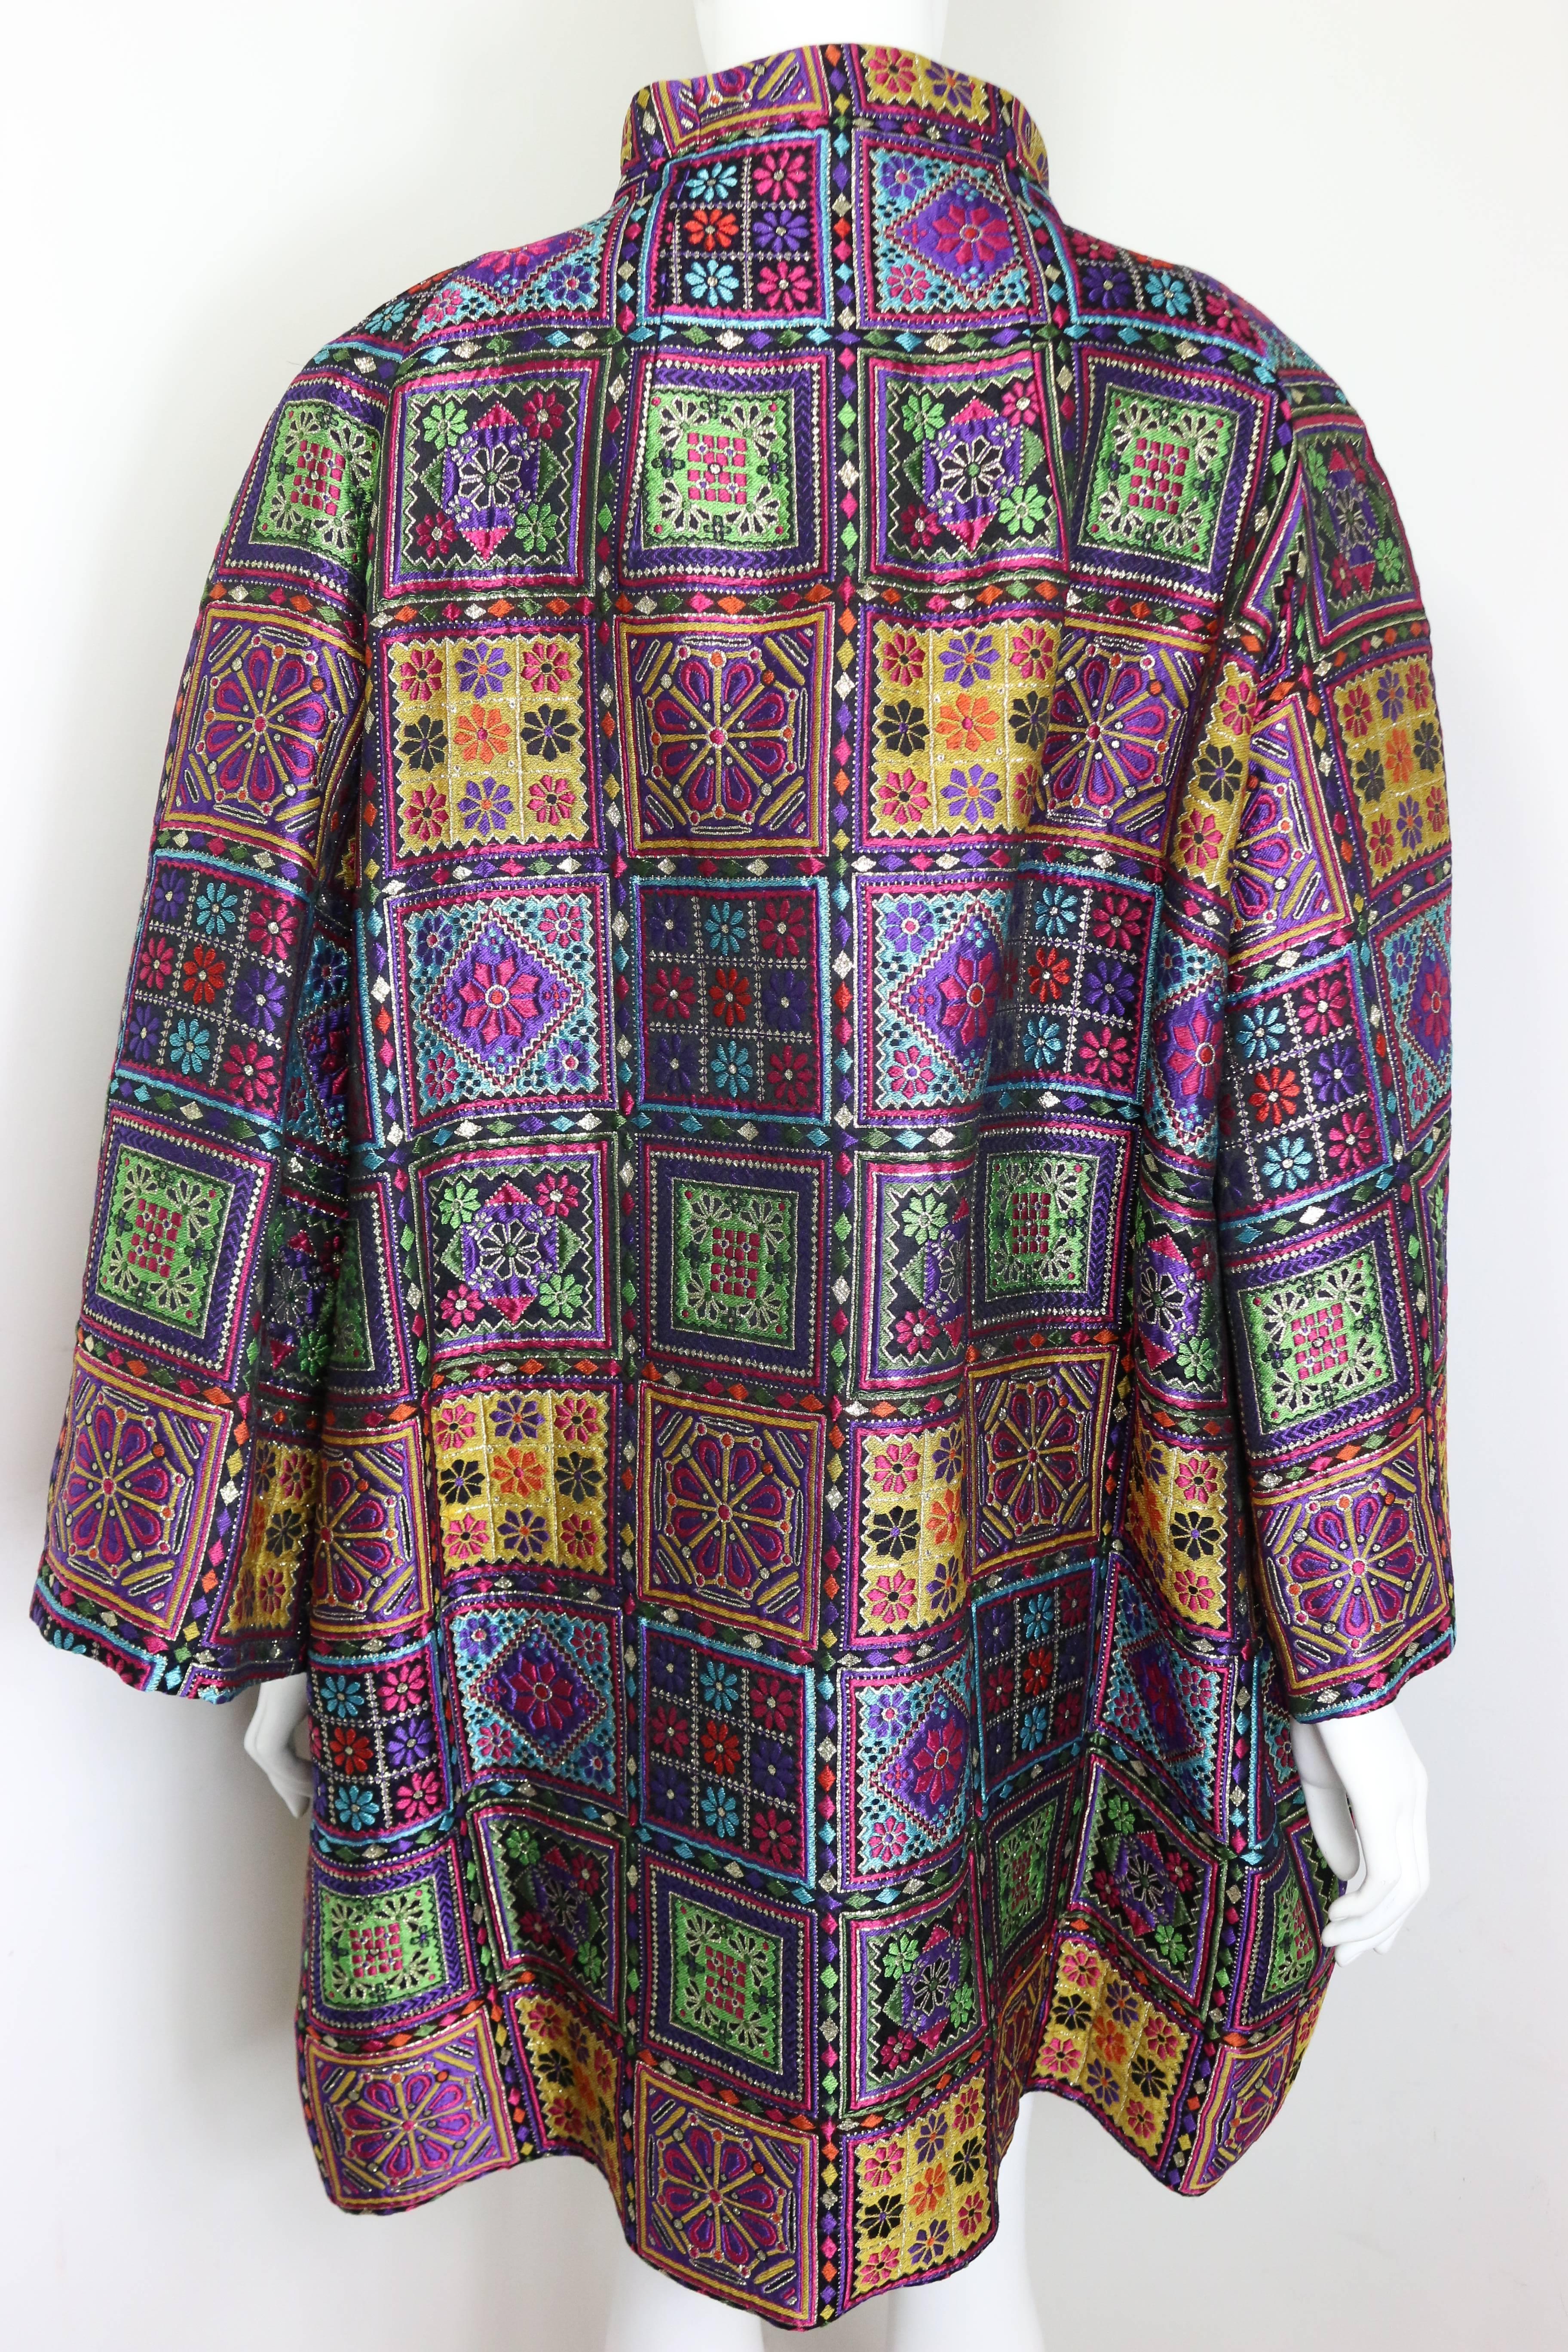 - Vintage Christian Lacroix embroidered multicolour floral prints clutch coat from Fall 1991 collection. 

- Featuring stand collar, long sleeves, two side pockets and black quilted lining. 

- 31% Polyester, 30% Acrylic, 25% Silk and 14%